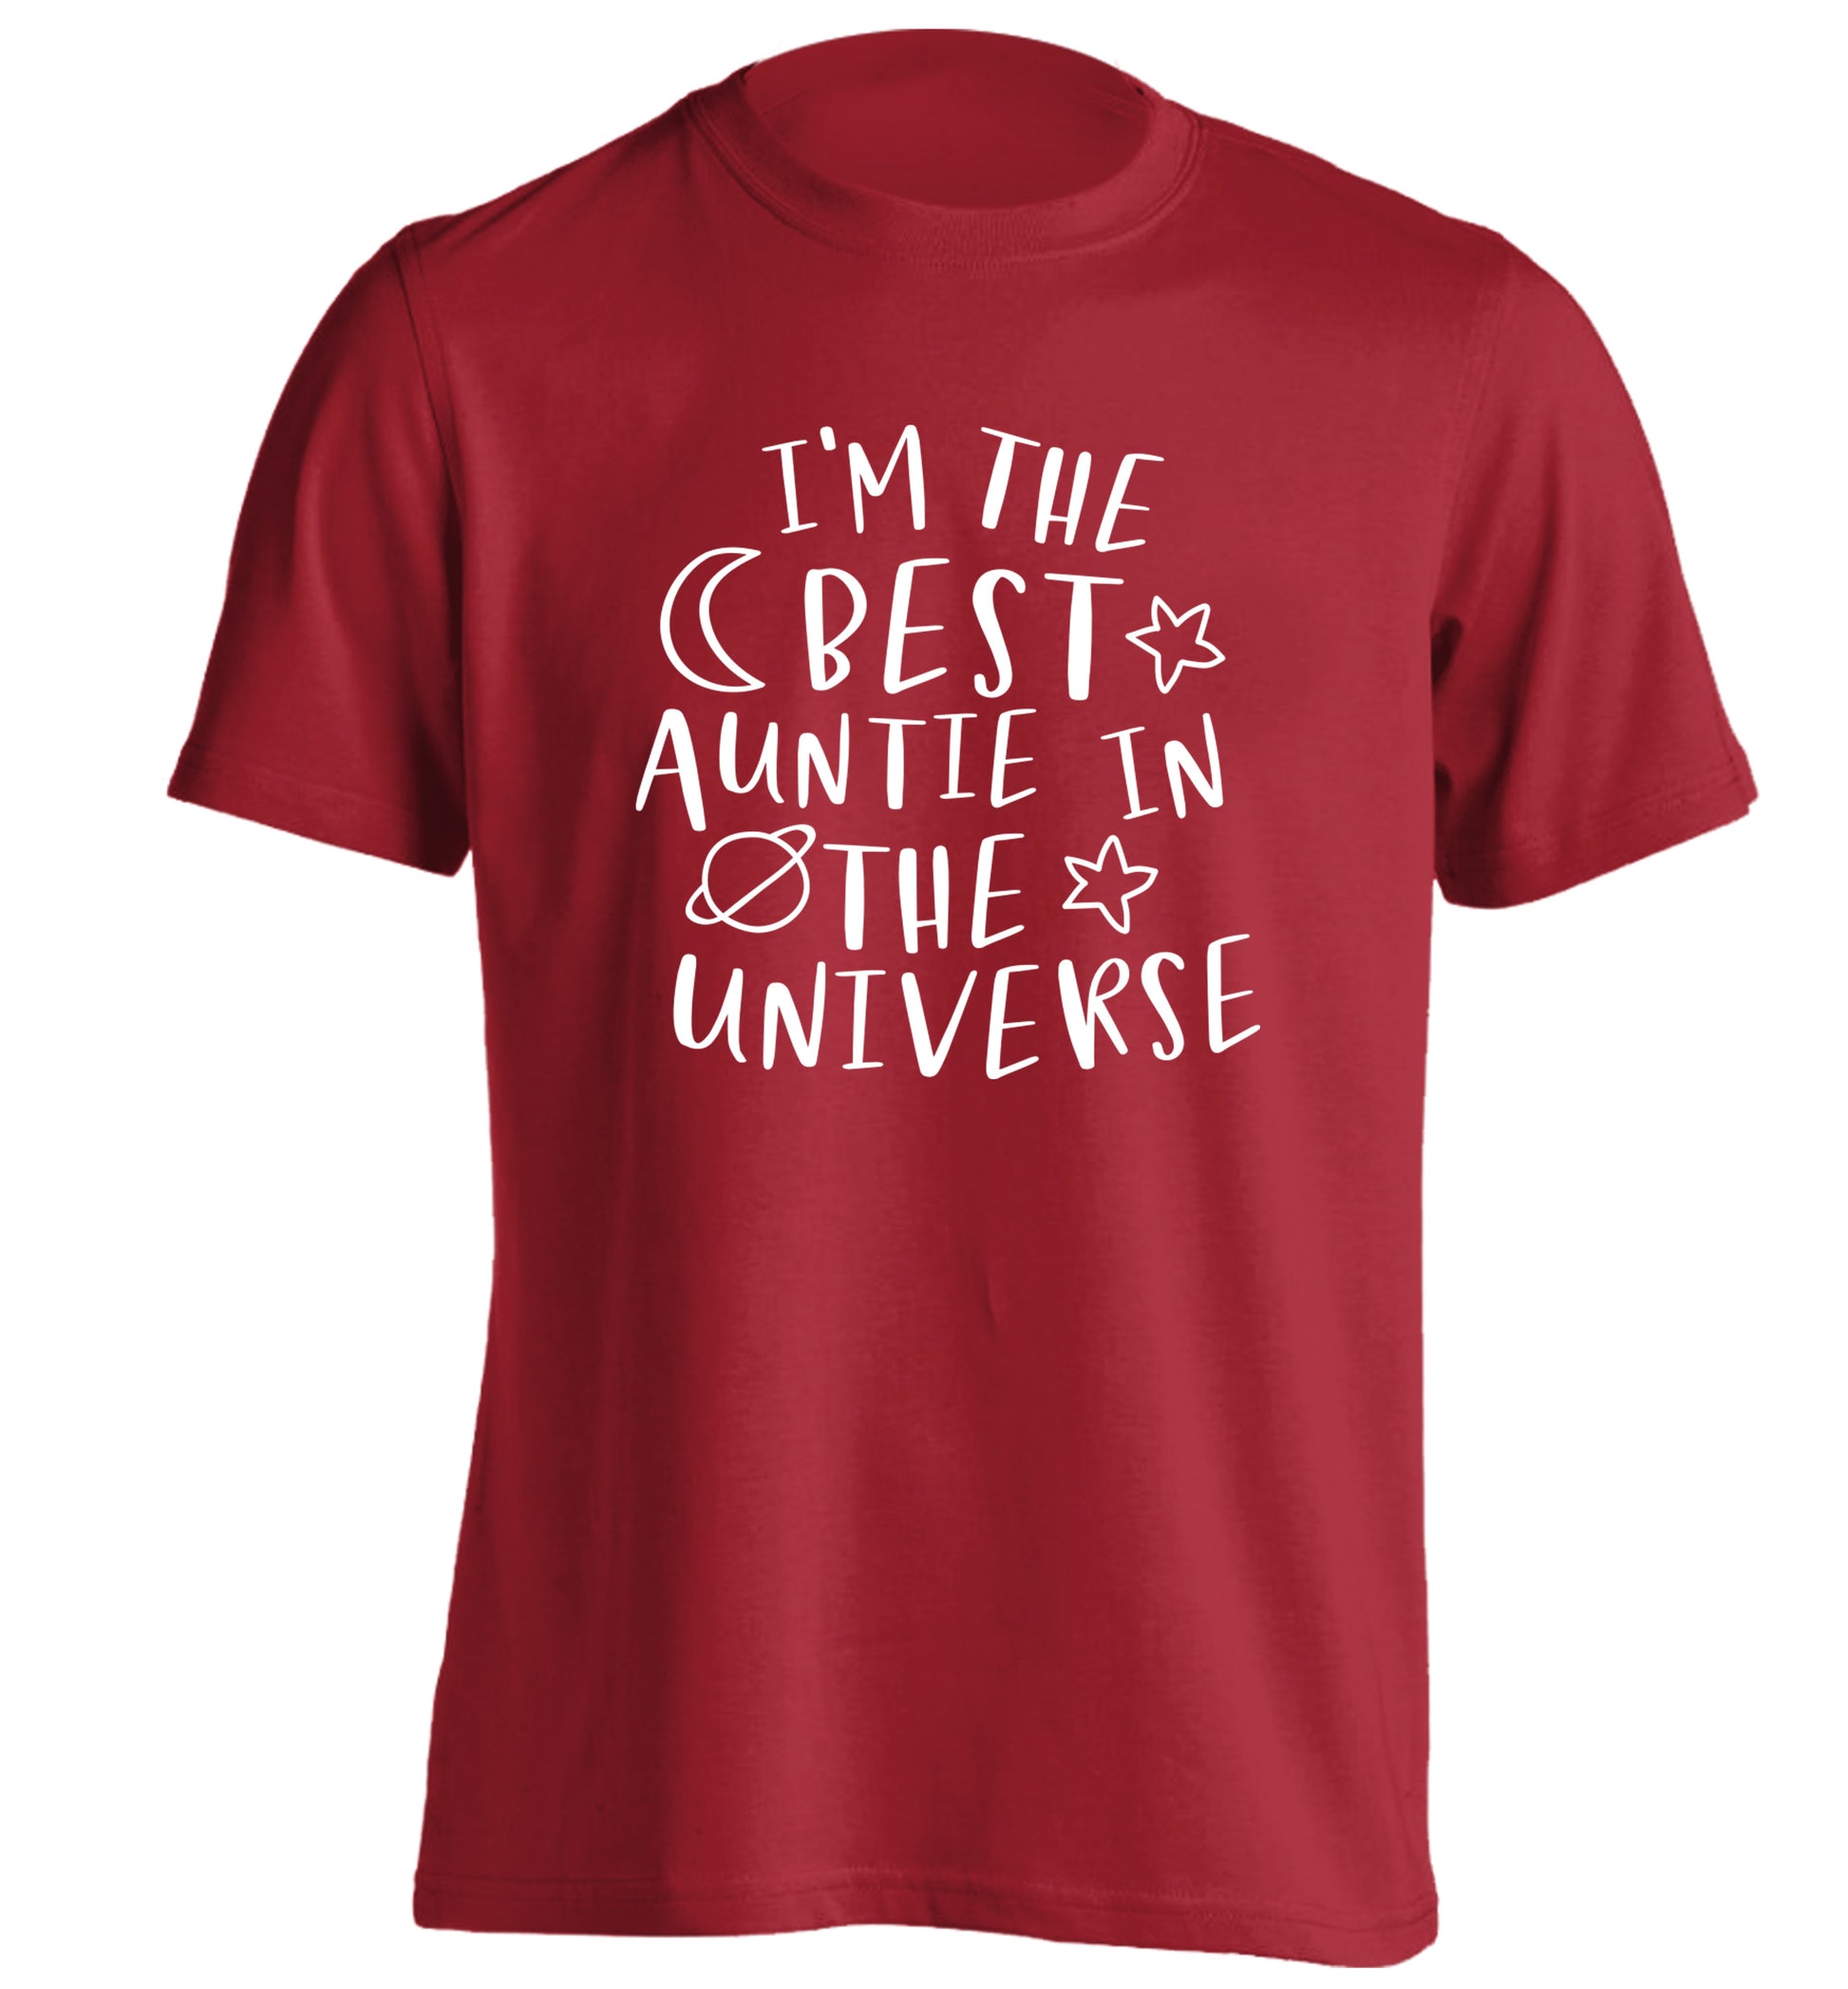 I'm the best auntie in the universe adults unisex red Tshirt 2XL